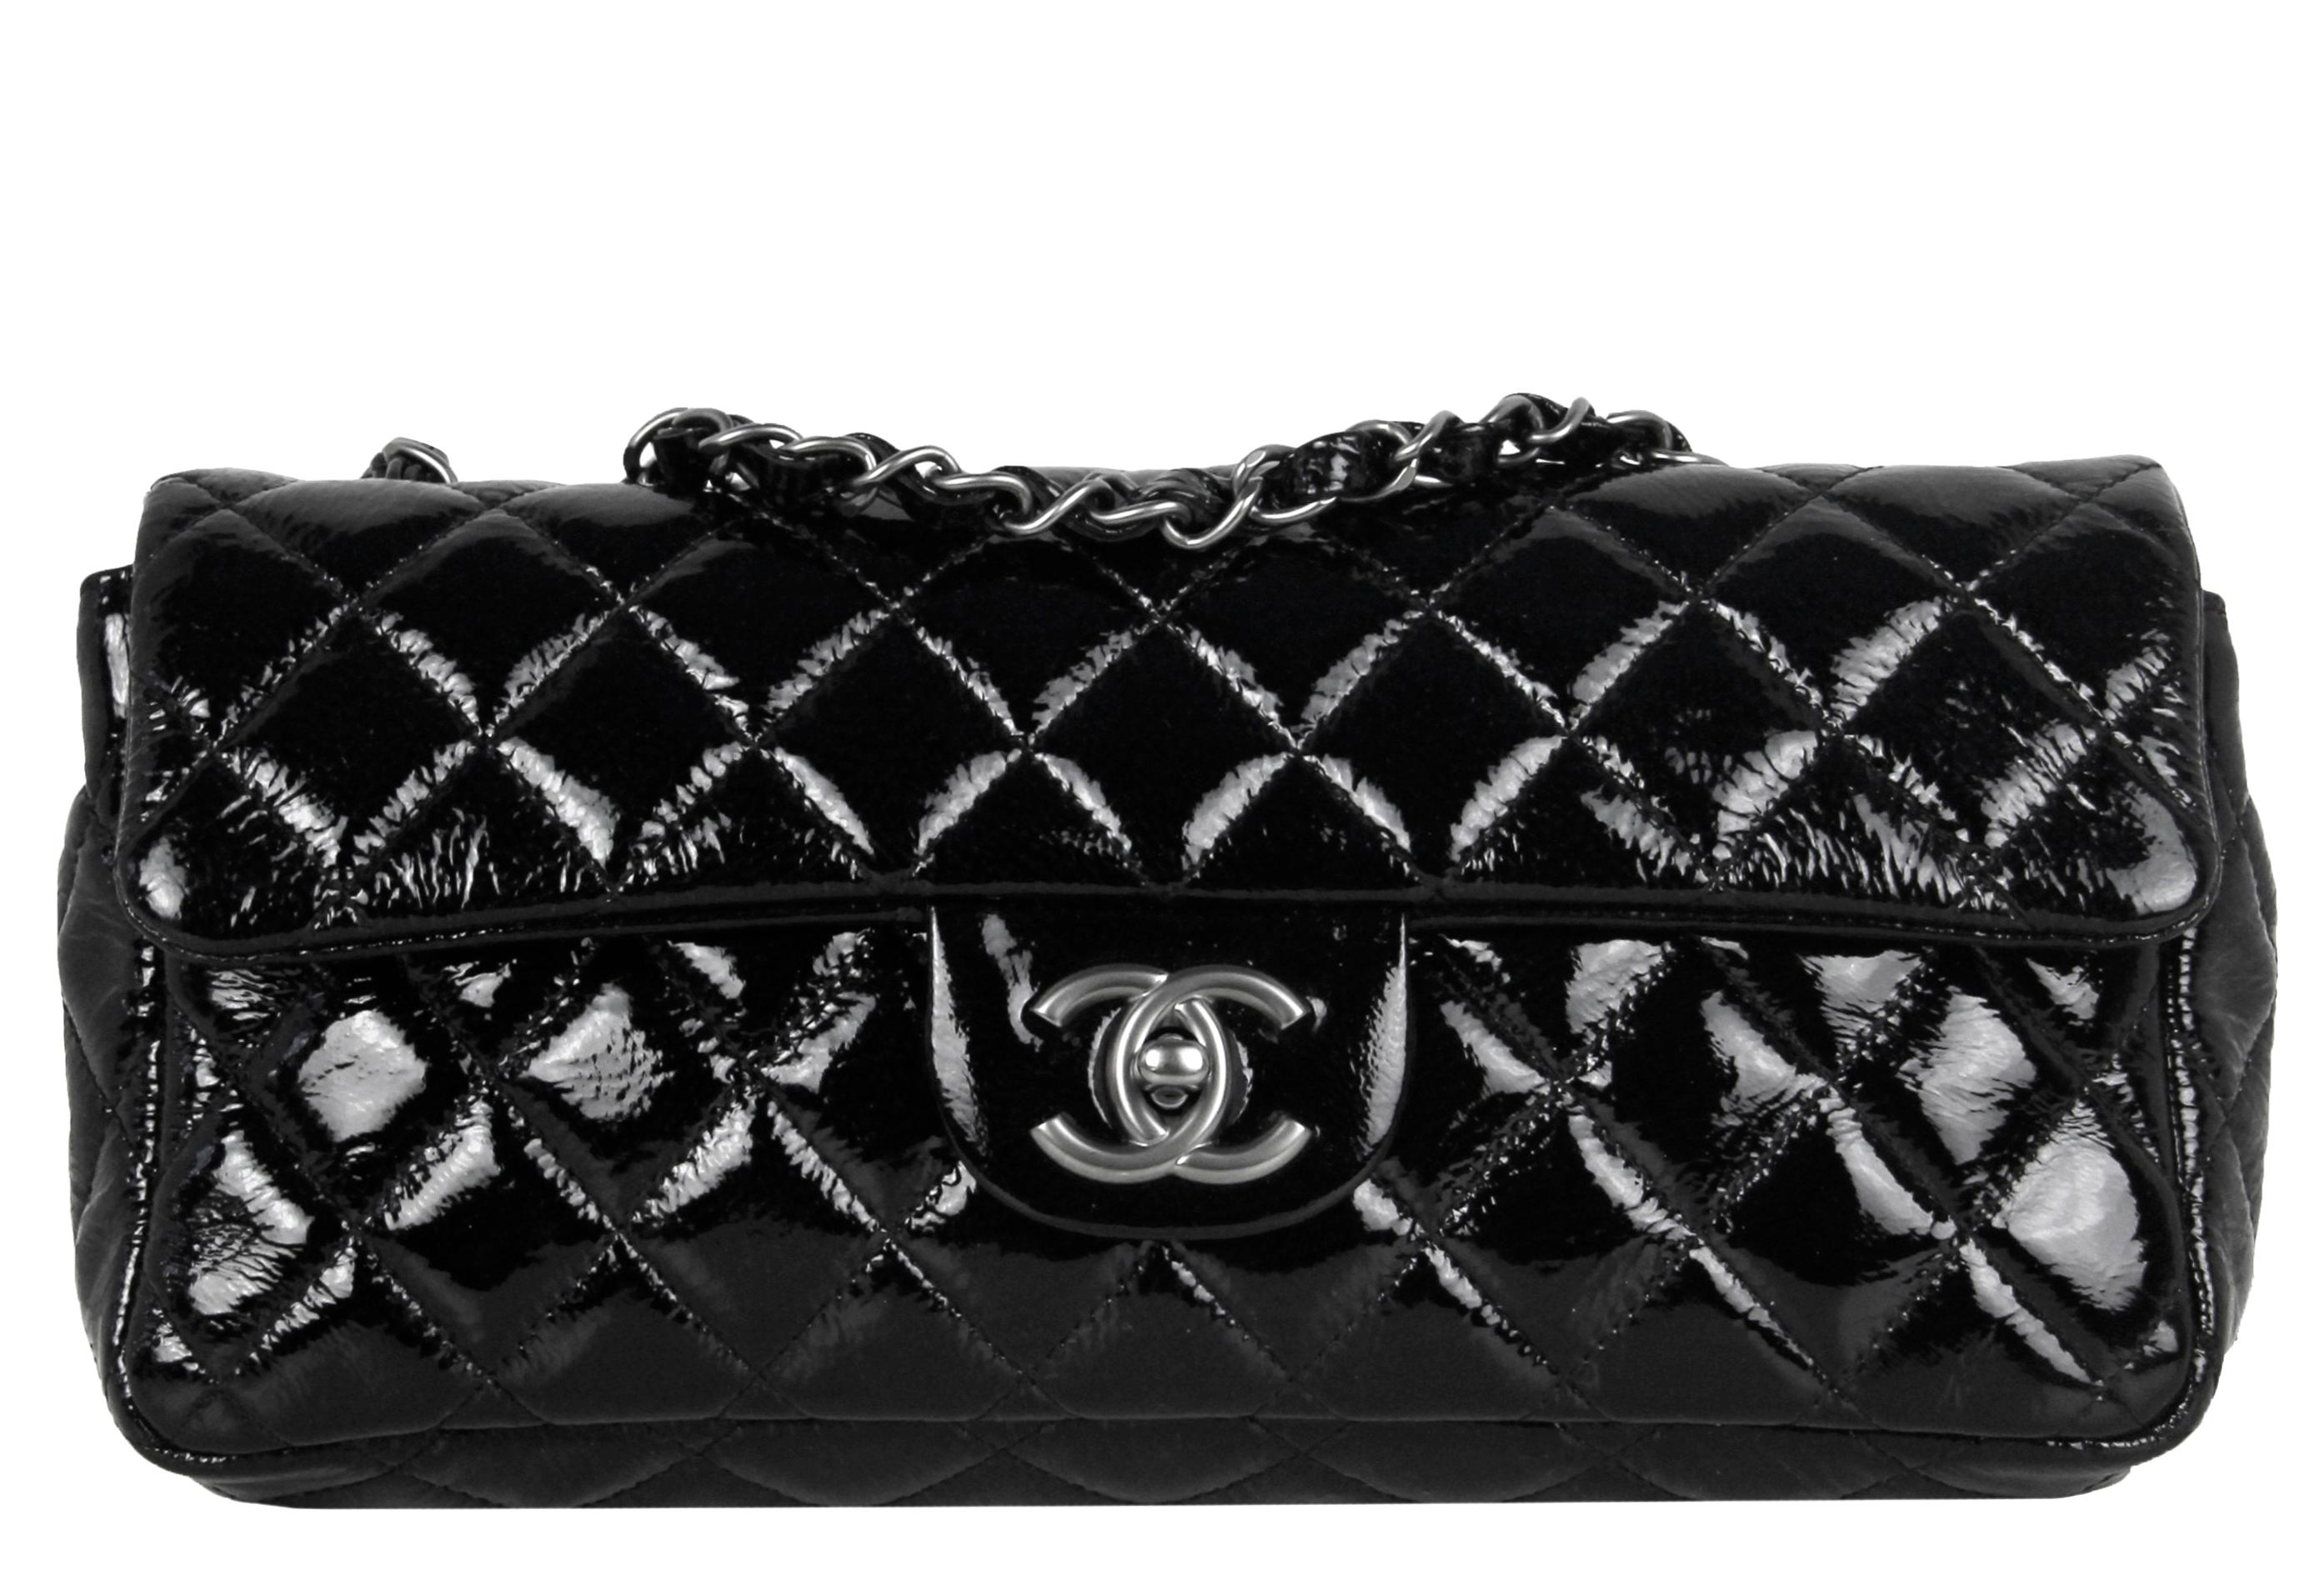 Chanel Black Distressed Patent Quilted East West Flap Bag

Made In: Italy
Year of Production: 2008-2009
Color: Black
Hardware: Darkened silvertone
Materials: Distressed patent leather
Lining: Smooth burgundy leather 
Closure/Opening: Flap top with